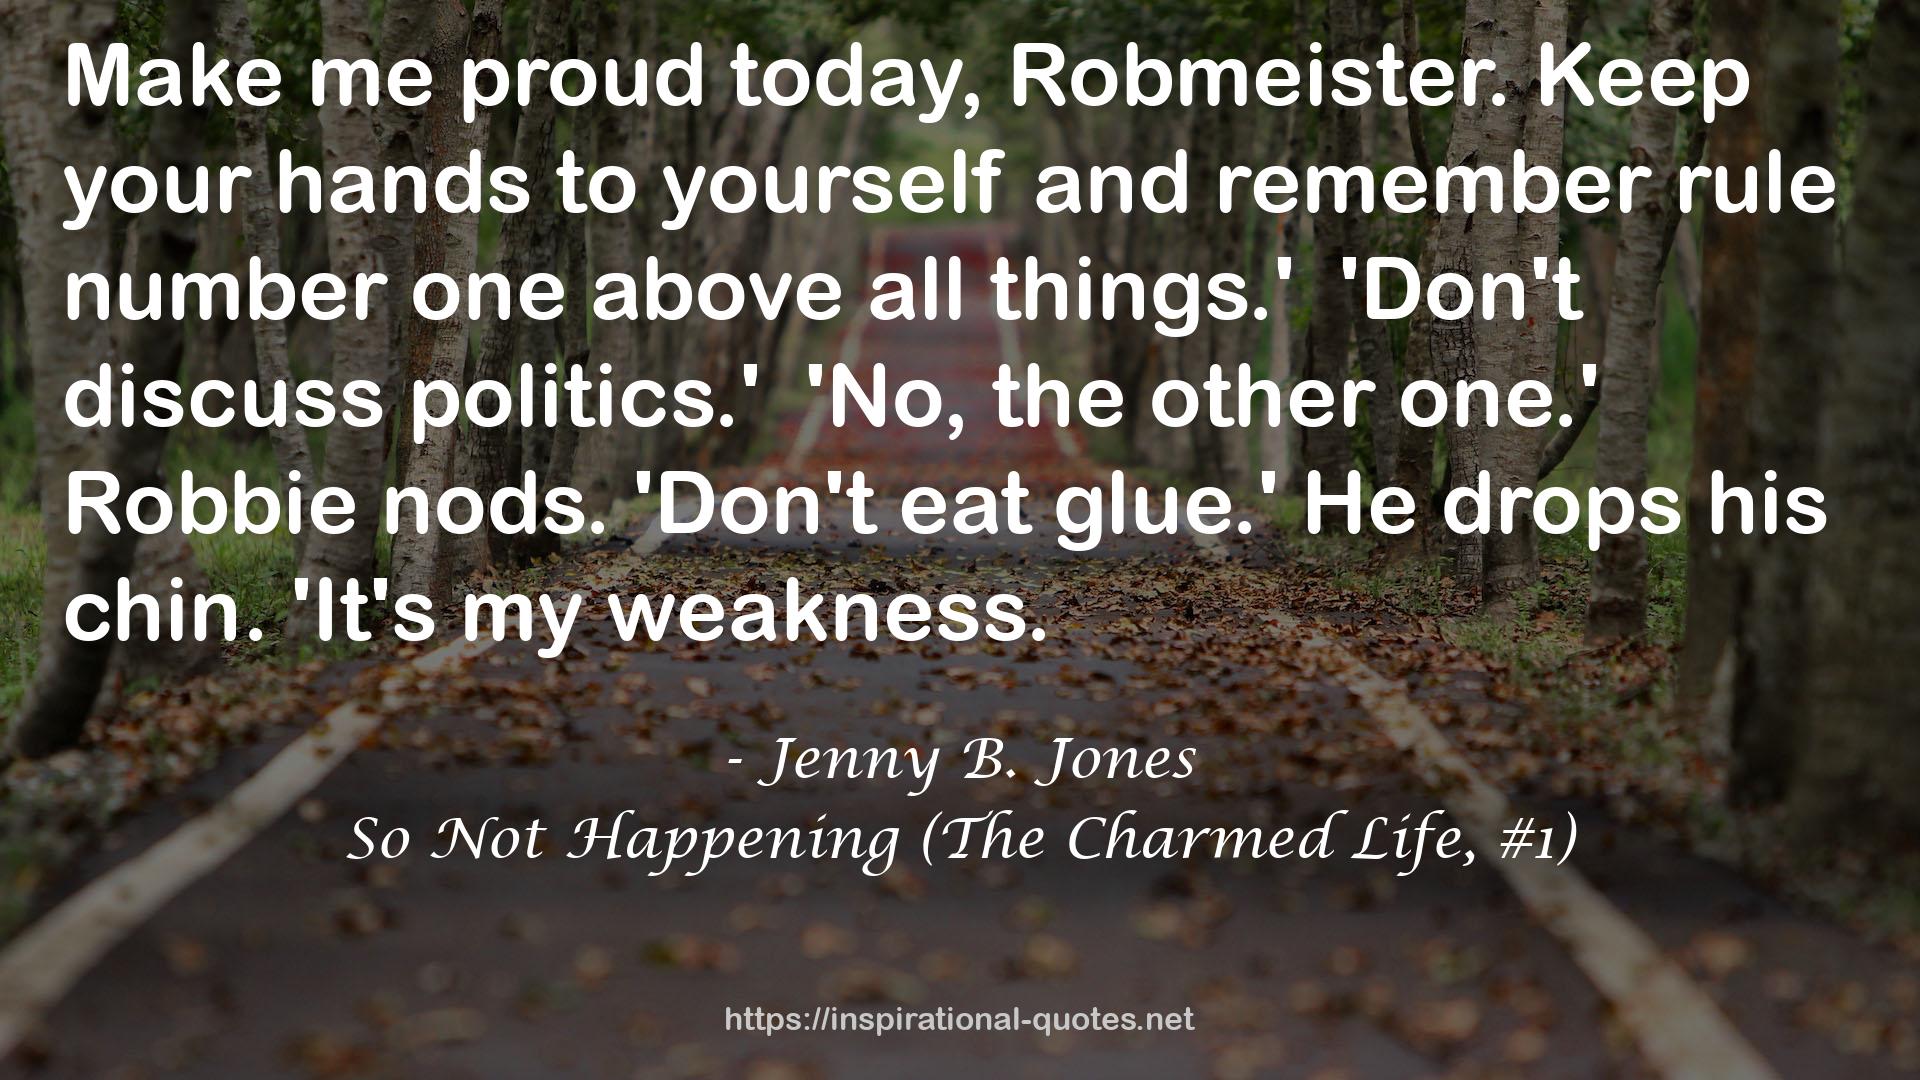 So Not Happening (The Charmed Life, #1) QUOTES